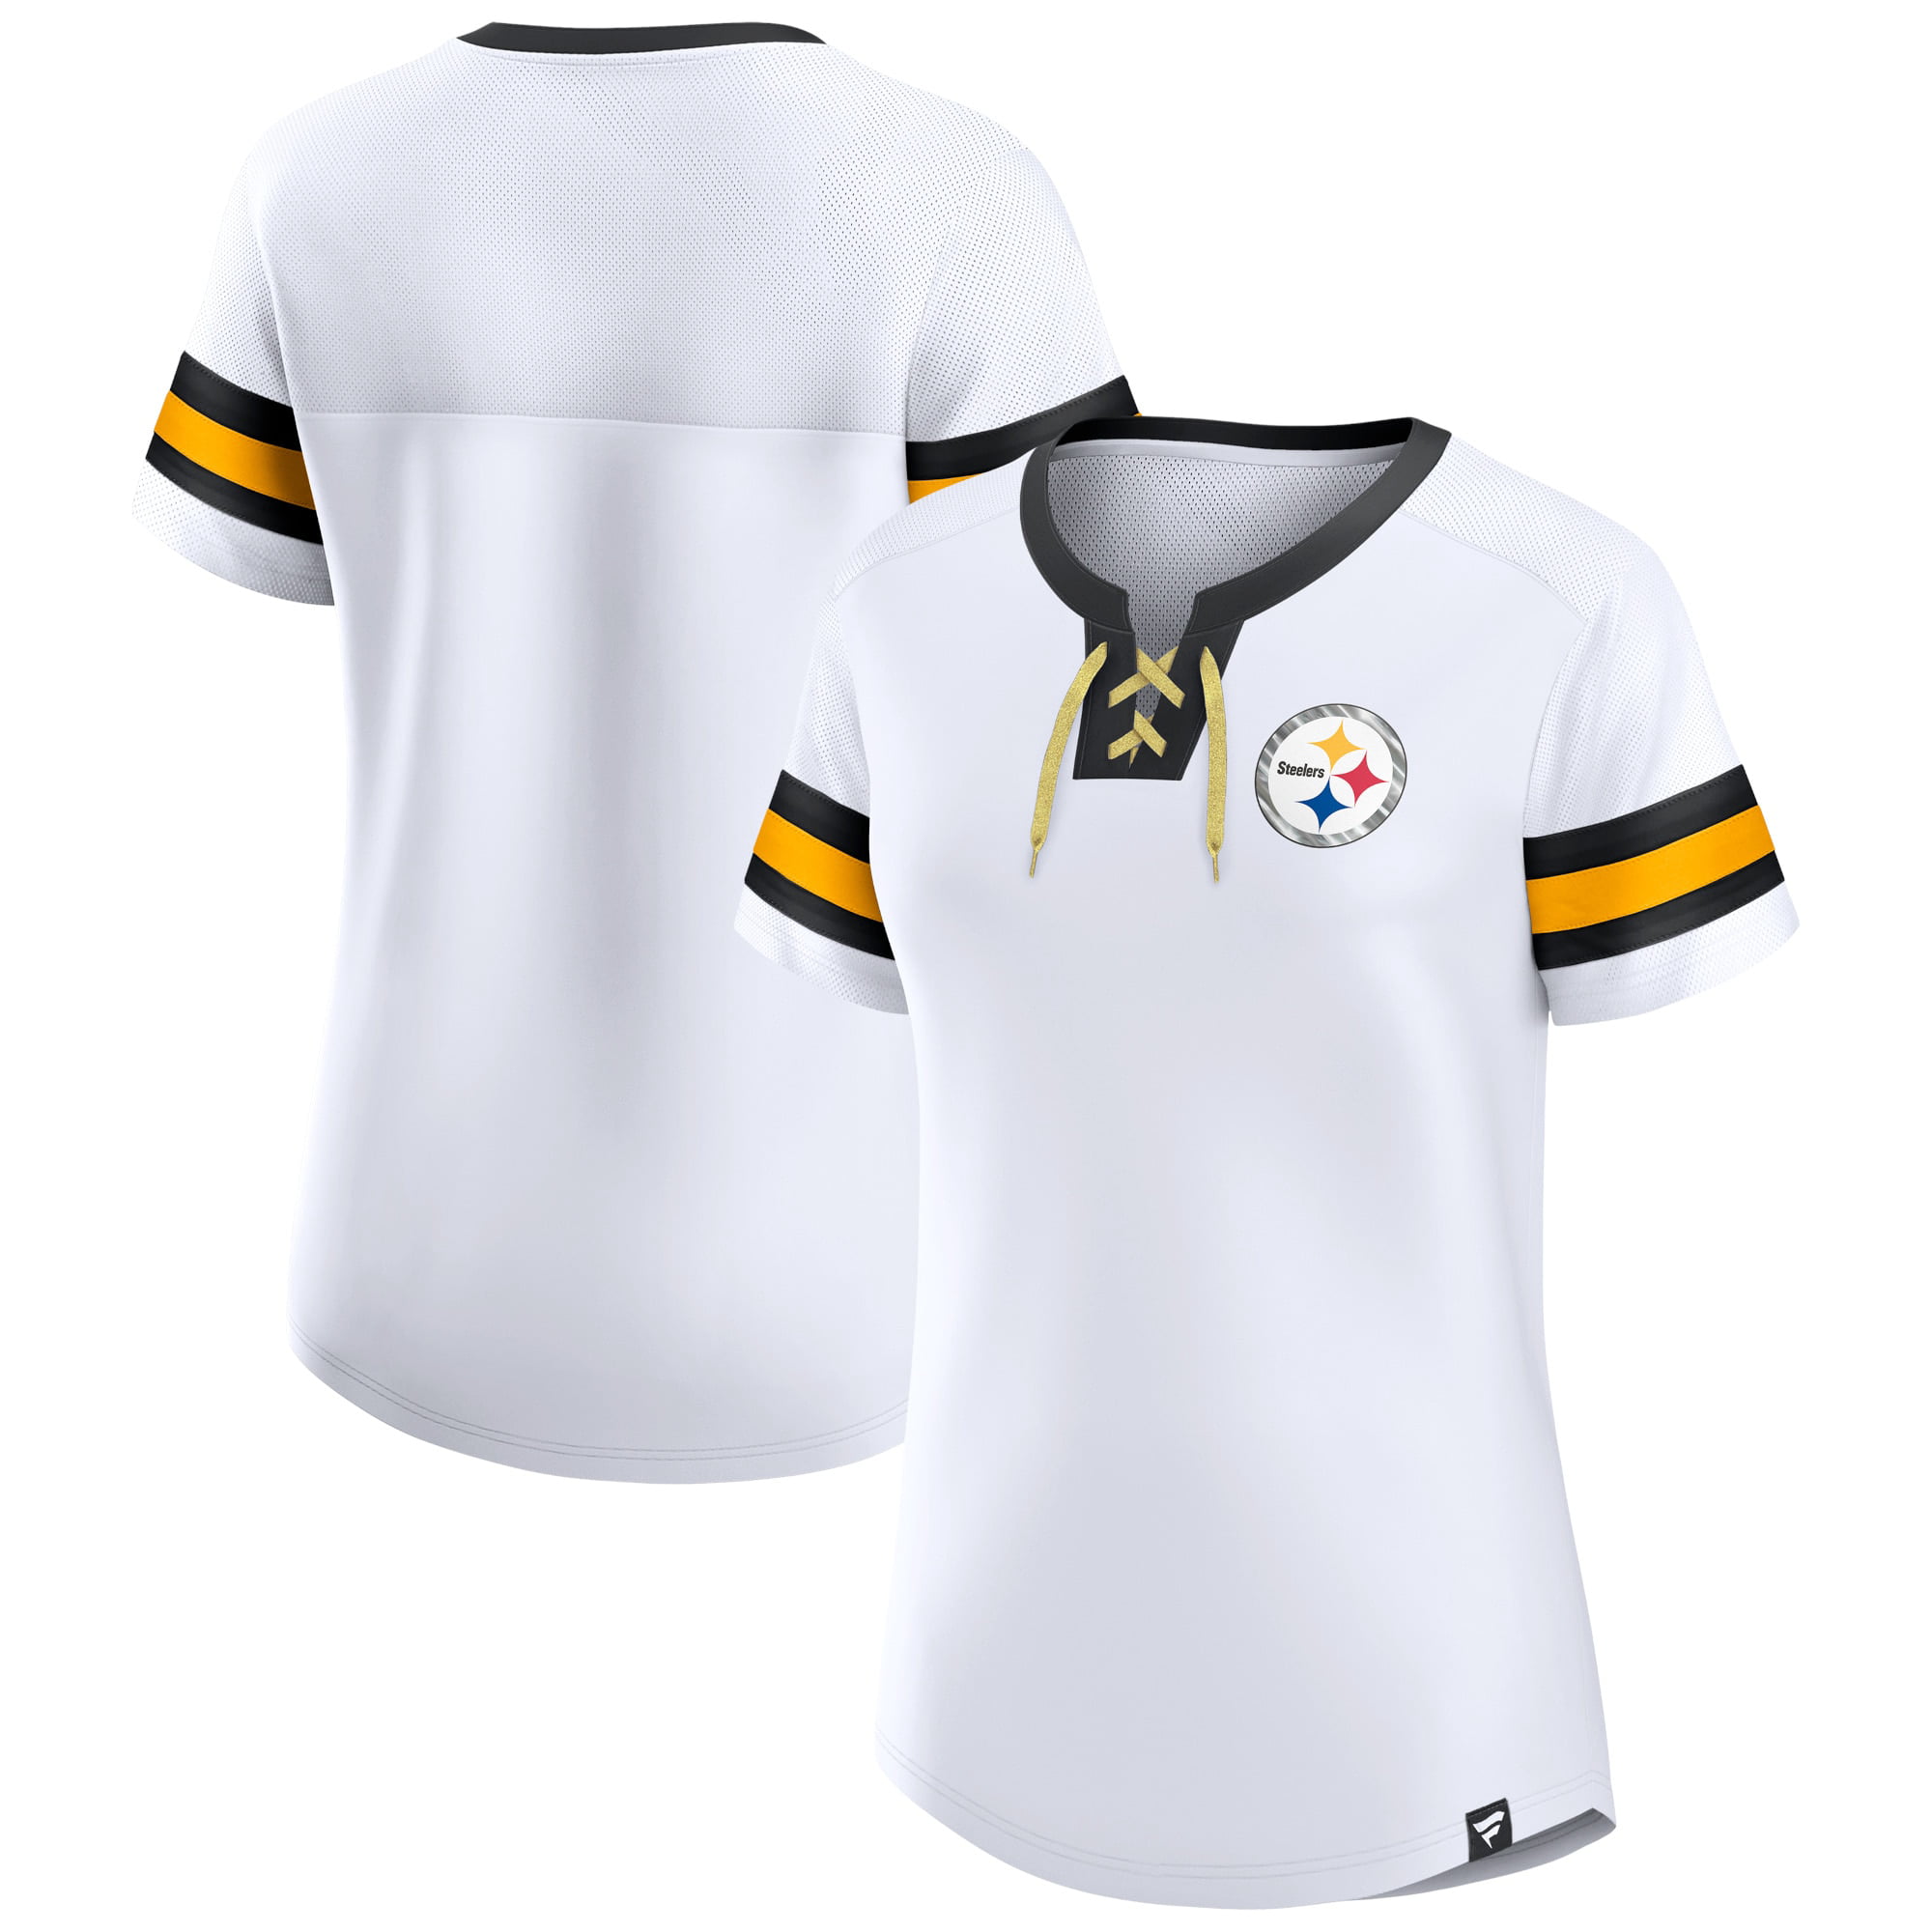 Women's Fanatics Branded White Pittsburgh Steelers Sunday Best Lace-Up  T-Shirt 